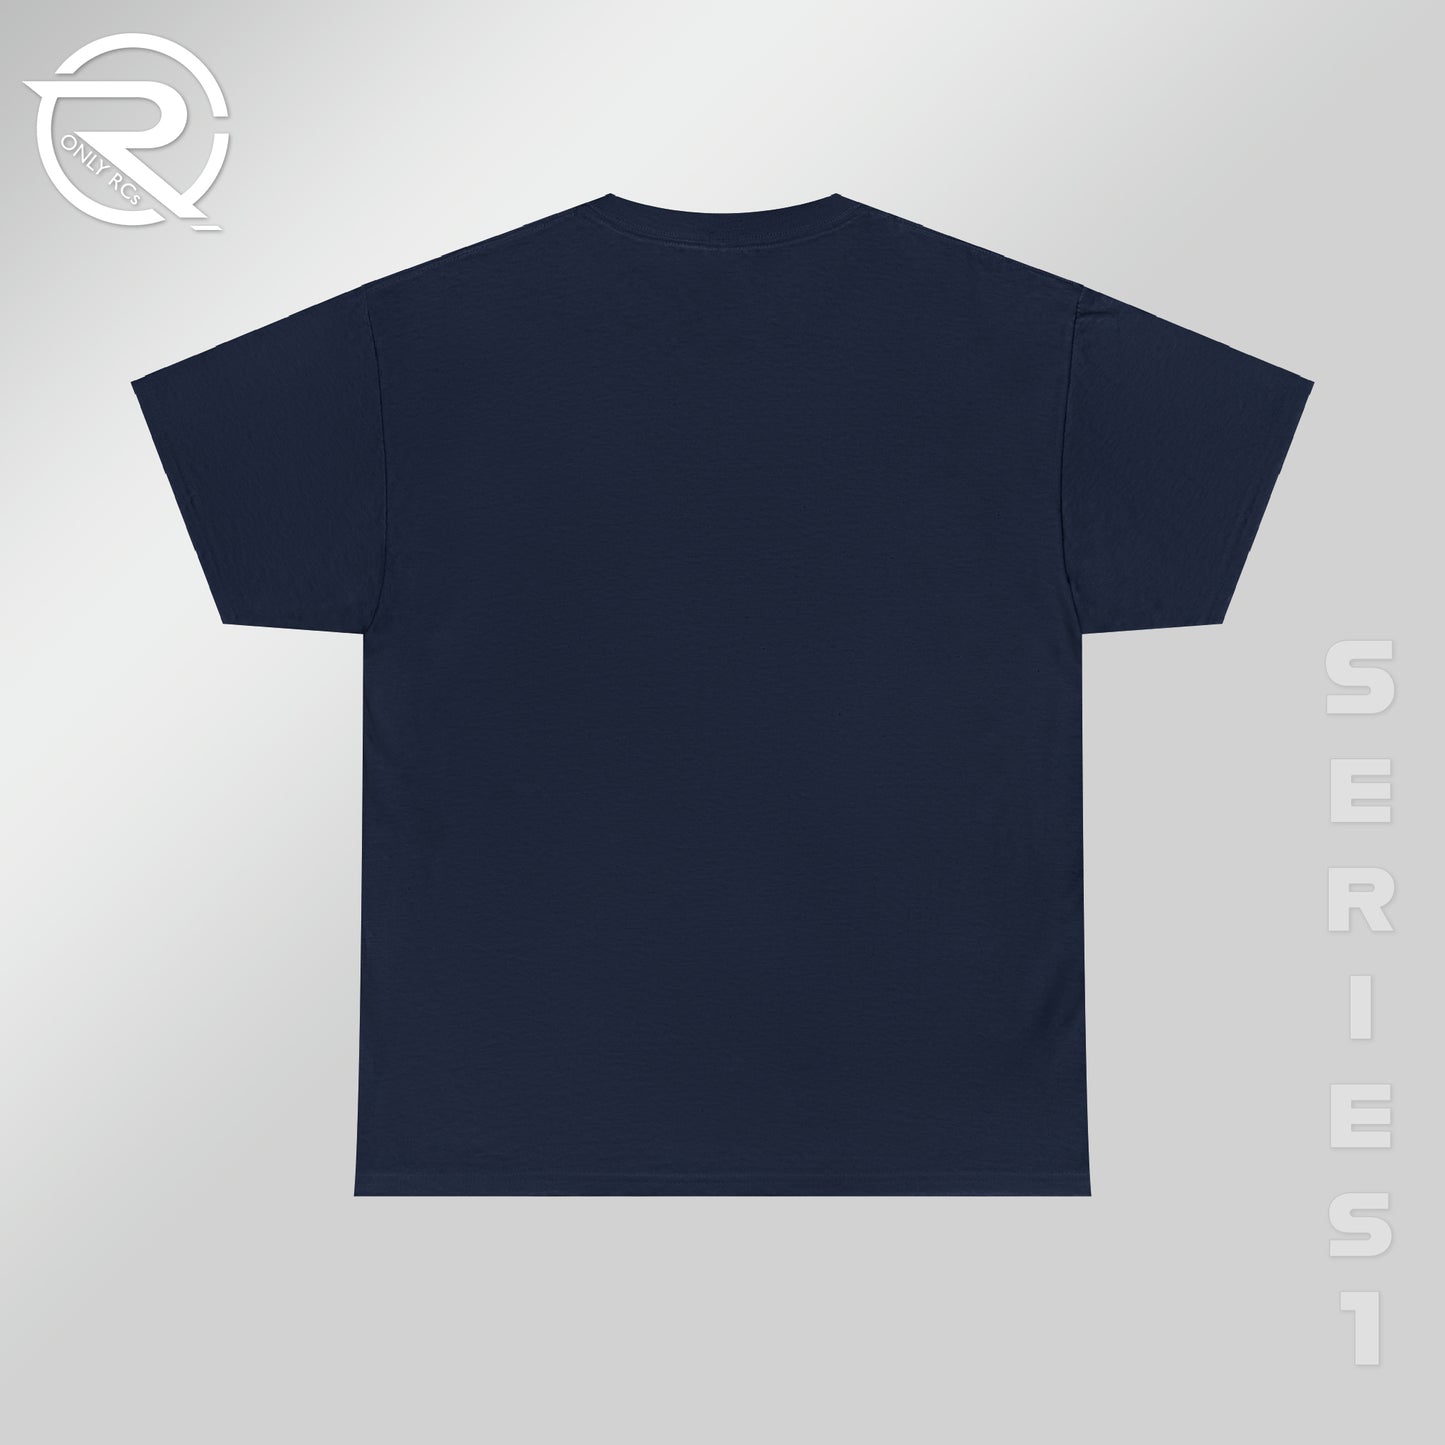 OnlyRCs - 1/5th Scale Racing Addict Heavy Cotton Tee - Series 1